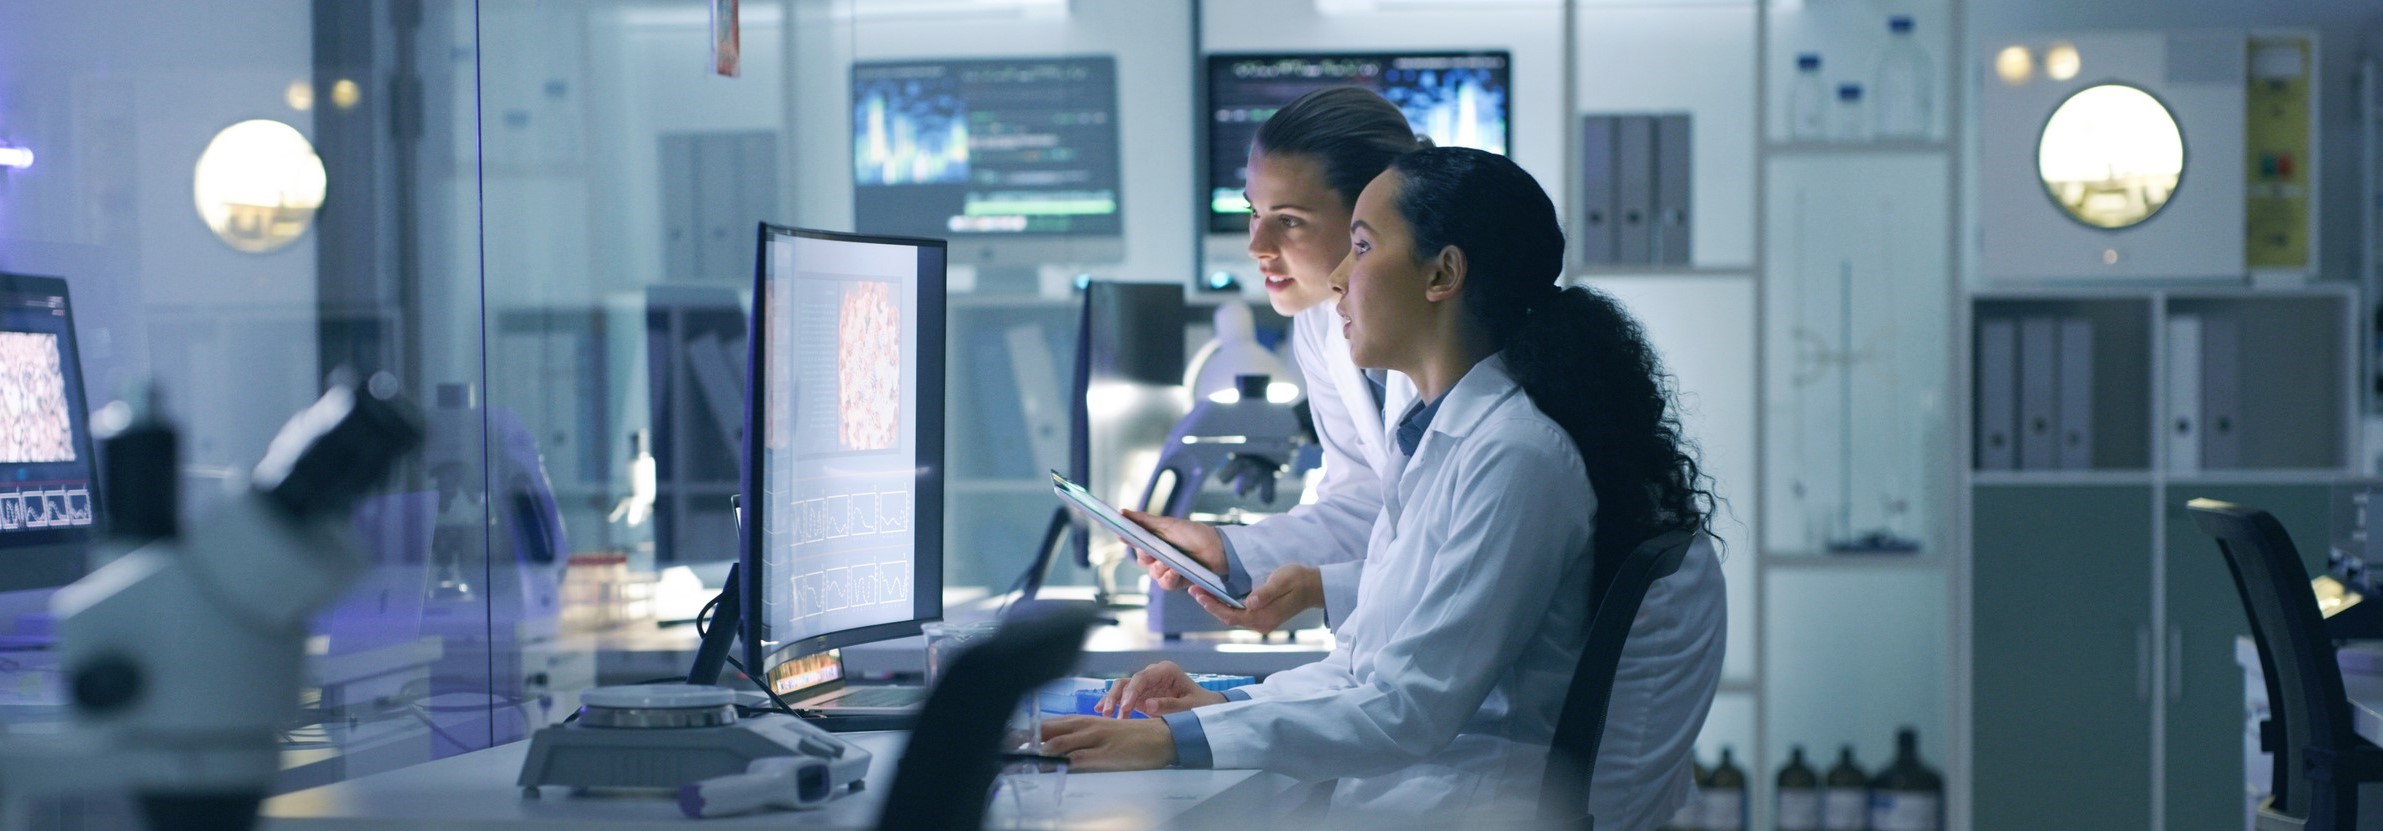 stock photo of two women, one seated one standing in a science lab looking at a large computer monitor.